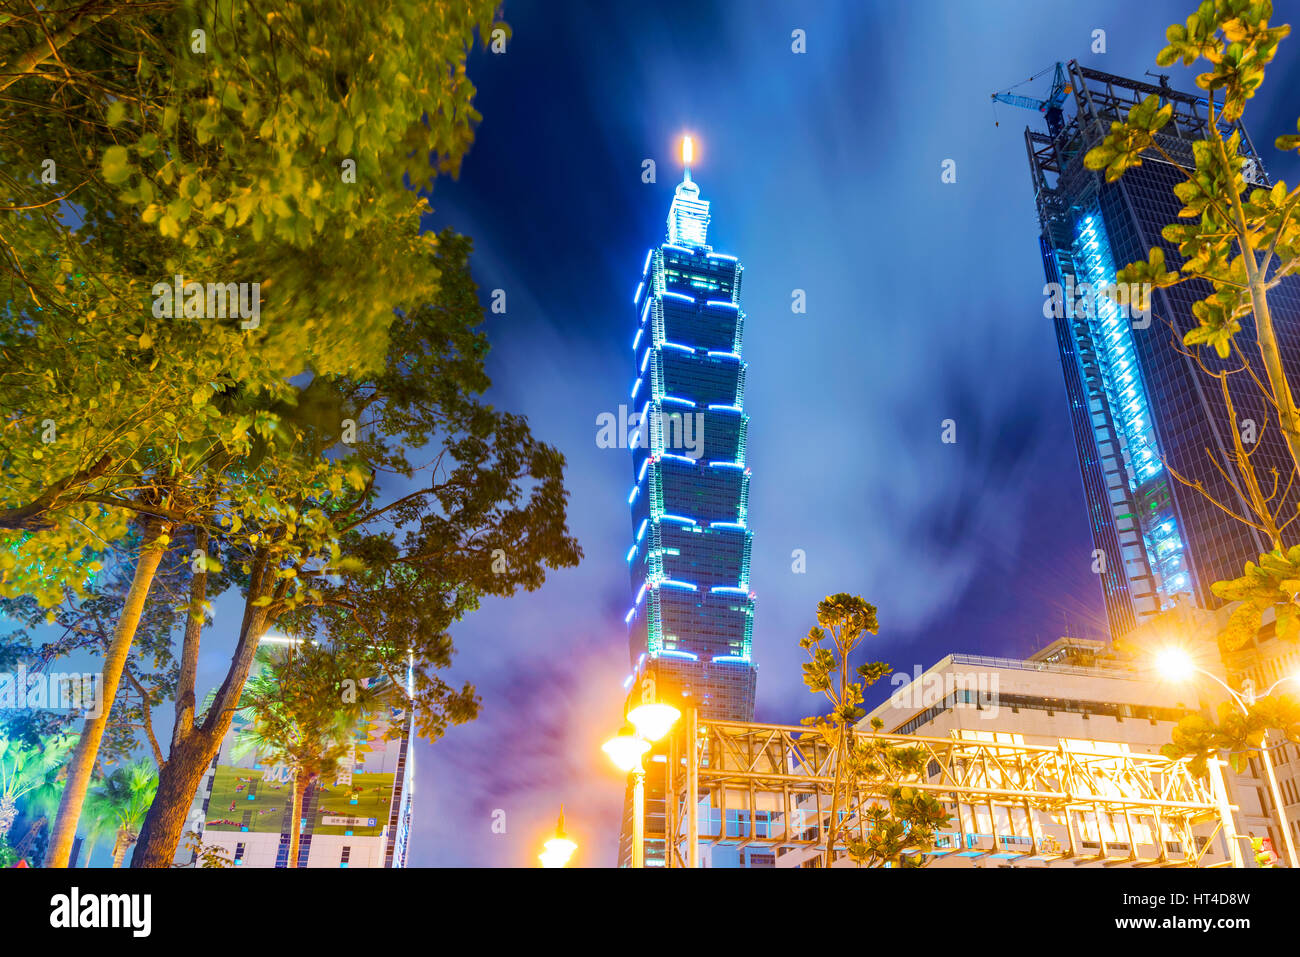 TAIPEI, TAIWAN - DECEMBER 31: This is a night view of Taipei 101 and Xinyi financial district buildings on New Years Eve on December 31, 2016 in Taipe Stock Photo